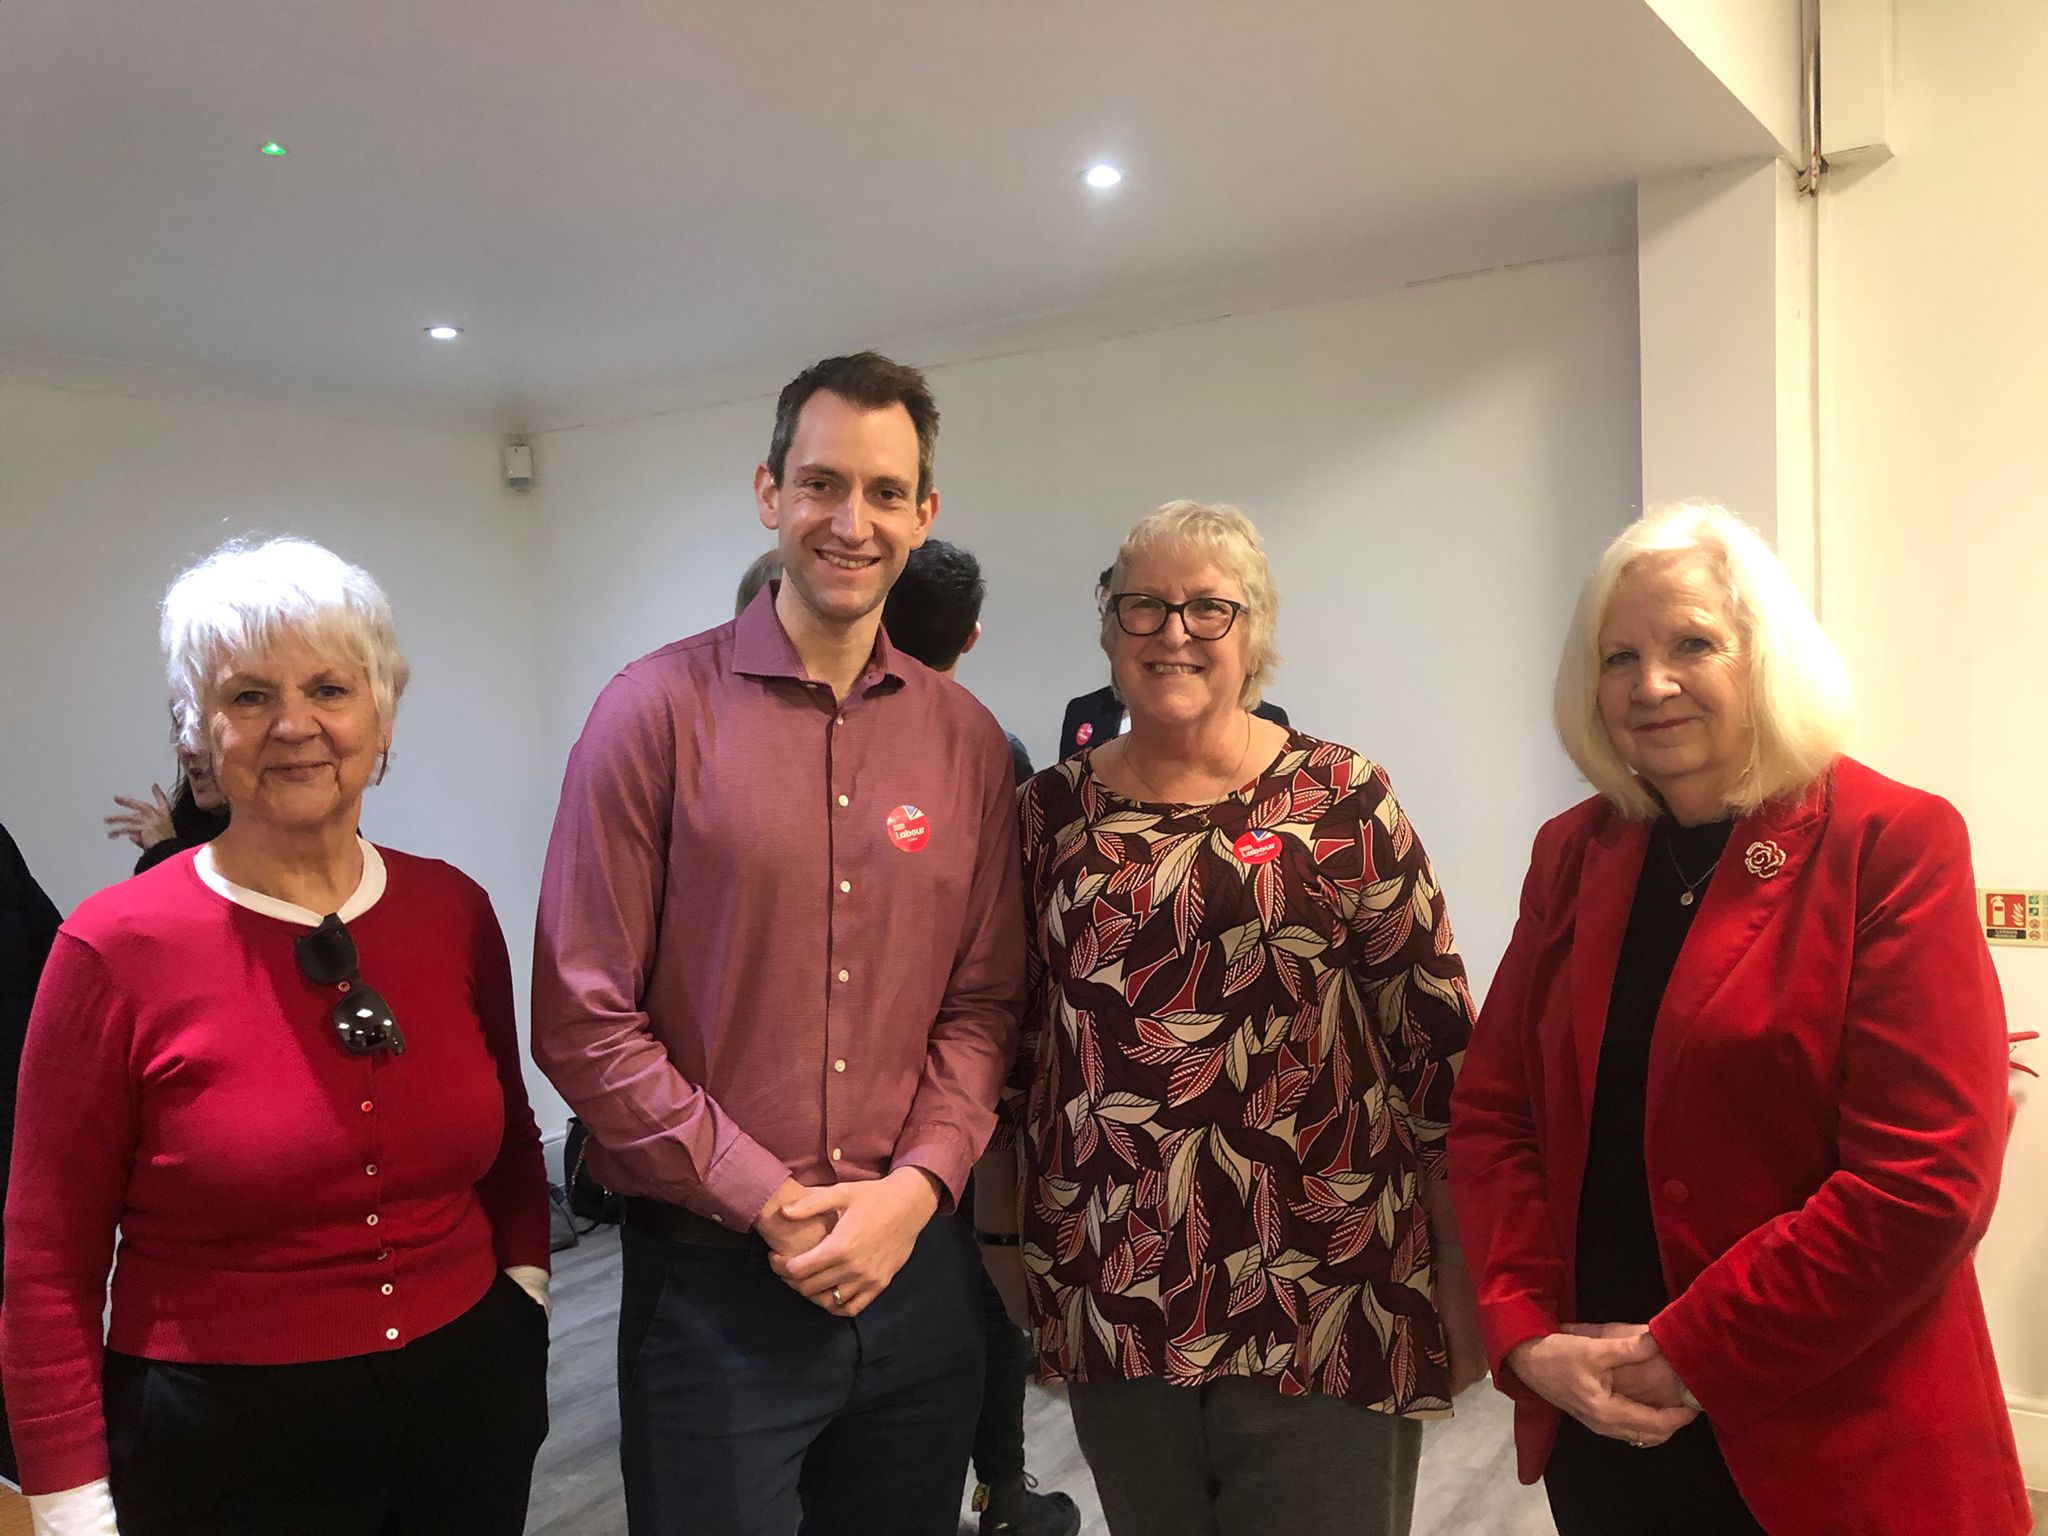 Welwyn Hatfield Labour chair Beth Kelly, Parliamentary candidate Andrew Lewin, Labour Group council leader Lynn Chesterman and special guest Baroness Sharon Taylor.